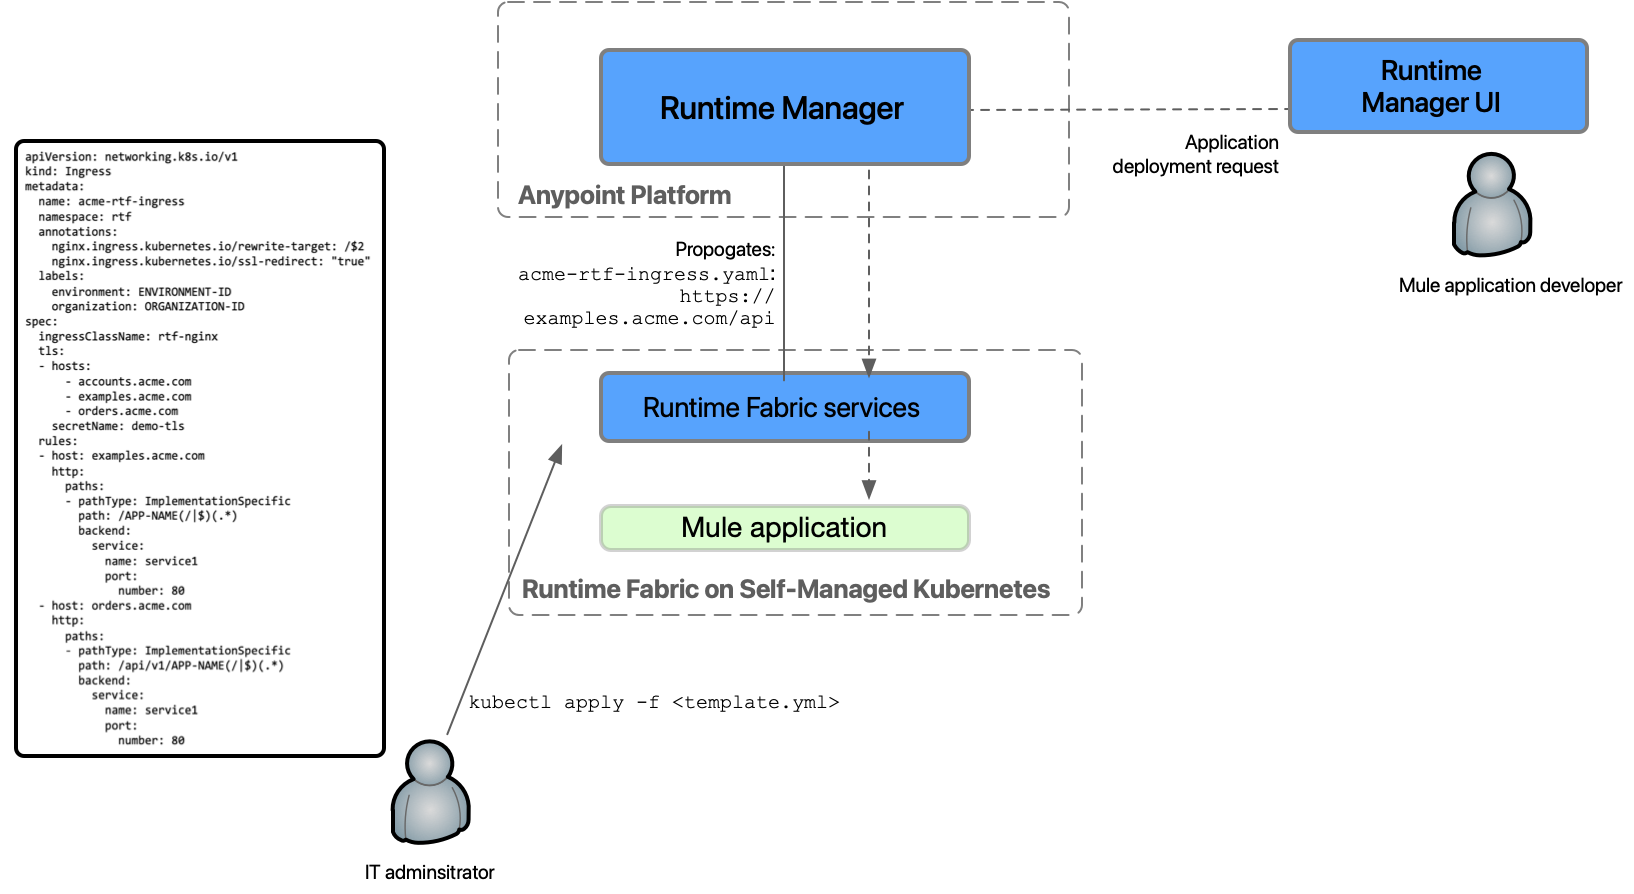 Diagram shows the ingress template workflow in Runtime Fabric